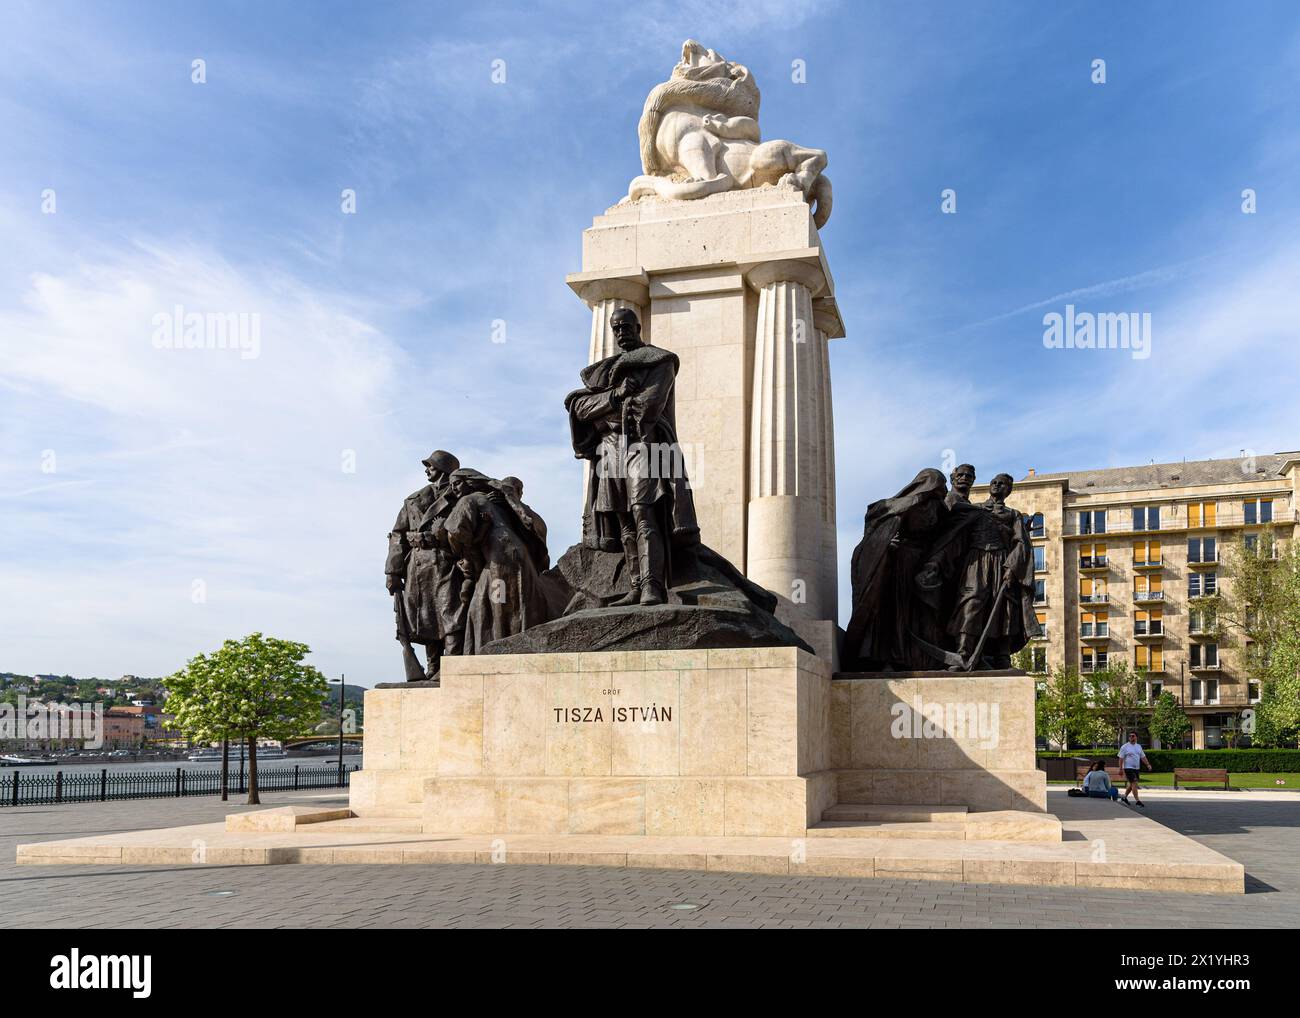 The Istvan Tisza statue in Budapest at Kossuth ter by parliament Stock Photo